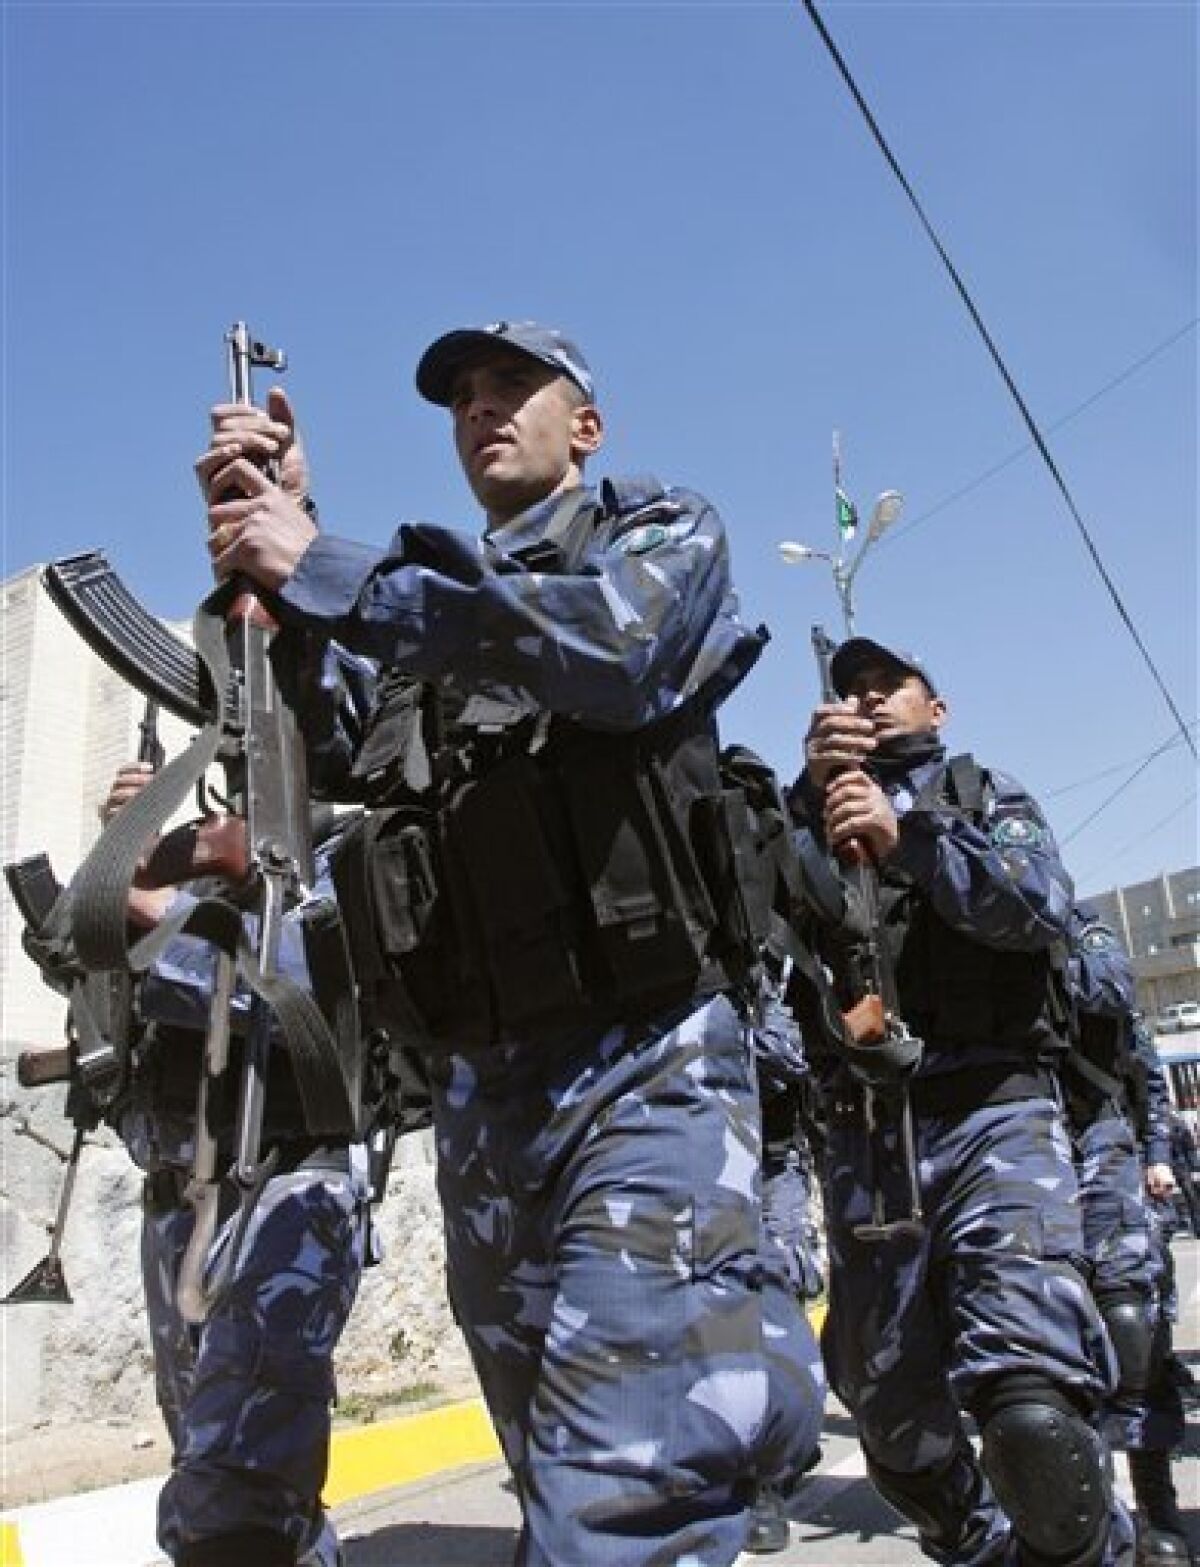 In this photo taken on March 17, 2009, Palestinian police officers march during a training session in the West Bank city of Hebron. Palestinian law enforcement authorities are facing a unique dilemma: how to maintain security when criminals have more freedom of movement than police do. Police say they can't arrest the crooks because they live in an Israeli-controlled area, which Palestinian forces can't enter freely. Palestinian police can only enter Israeli-controlled areas of the West Bank with permission, which they say is often difficult or impossible to obtain, making these areas ideal hideouts for criminals.(AP Photo/Nasser Shiyoukhi)